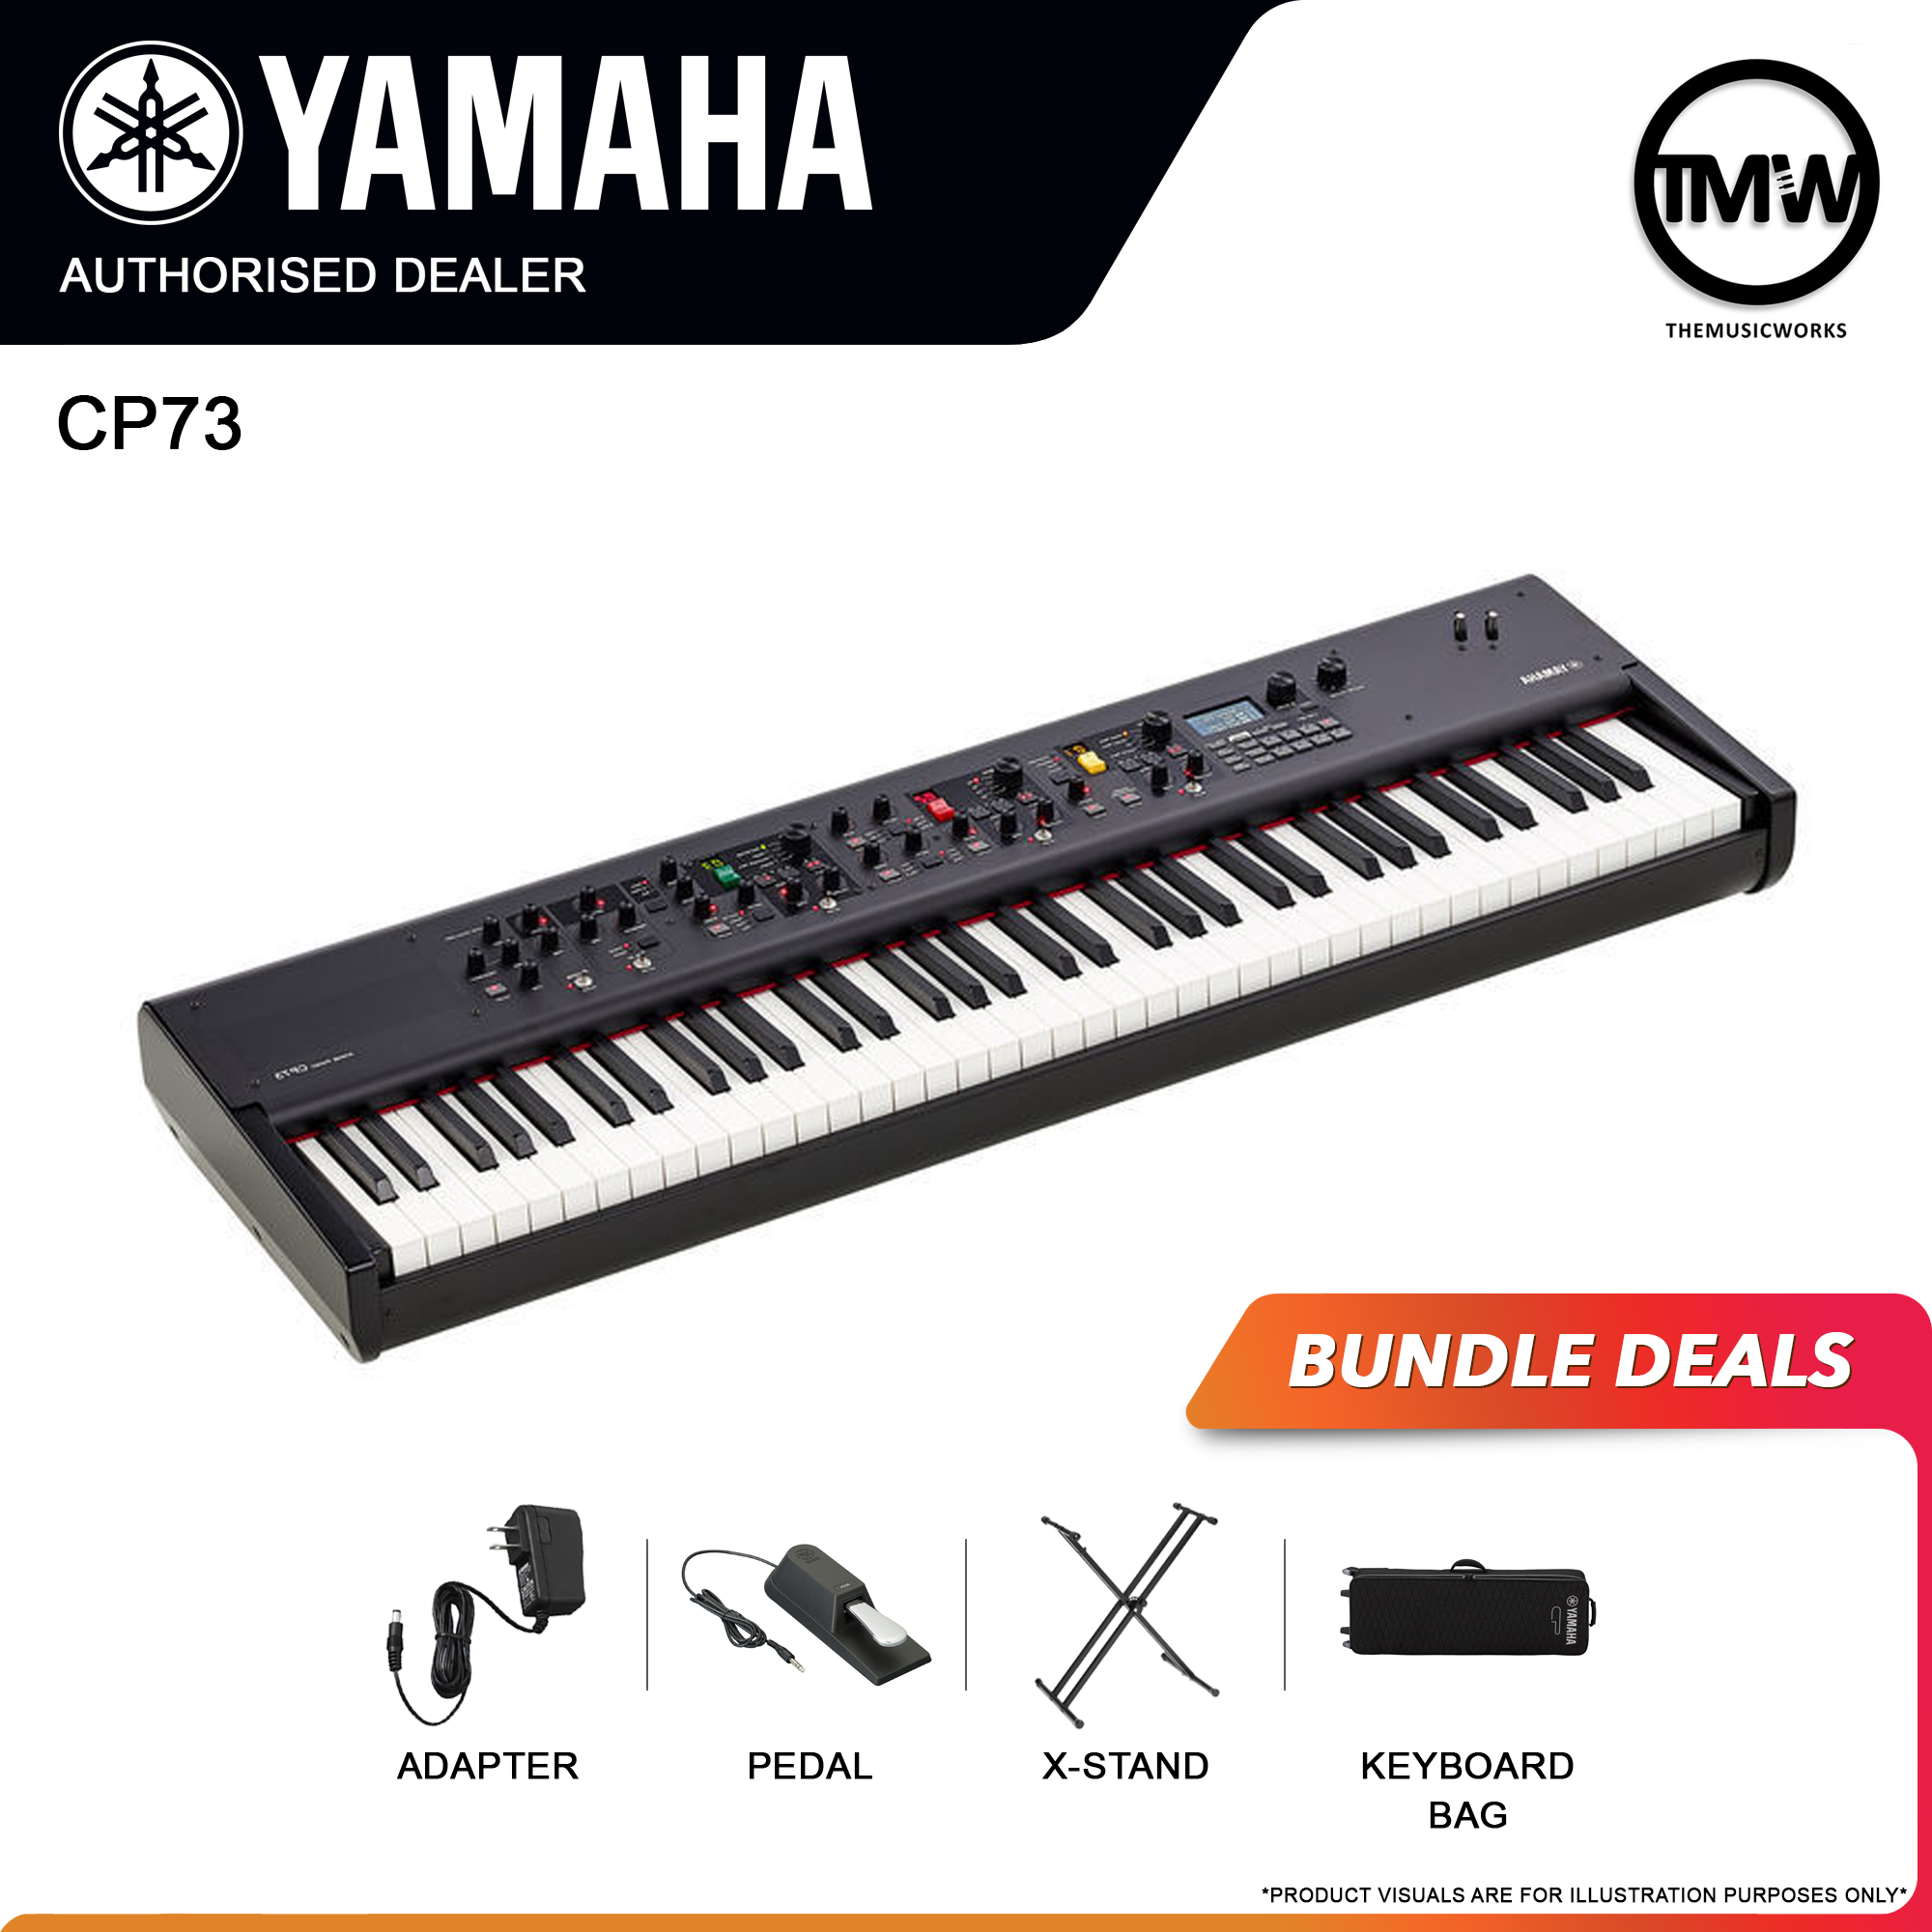 yamaha cp73 with adapter, pedal, x-stand, and keyboard bag